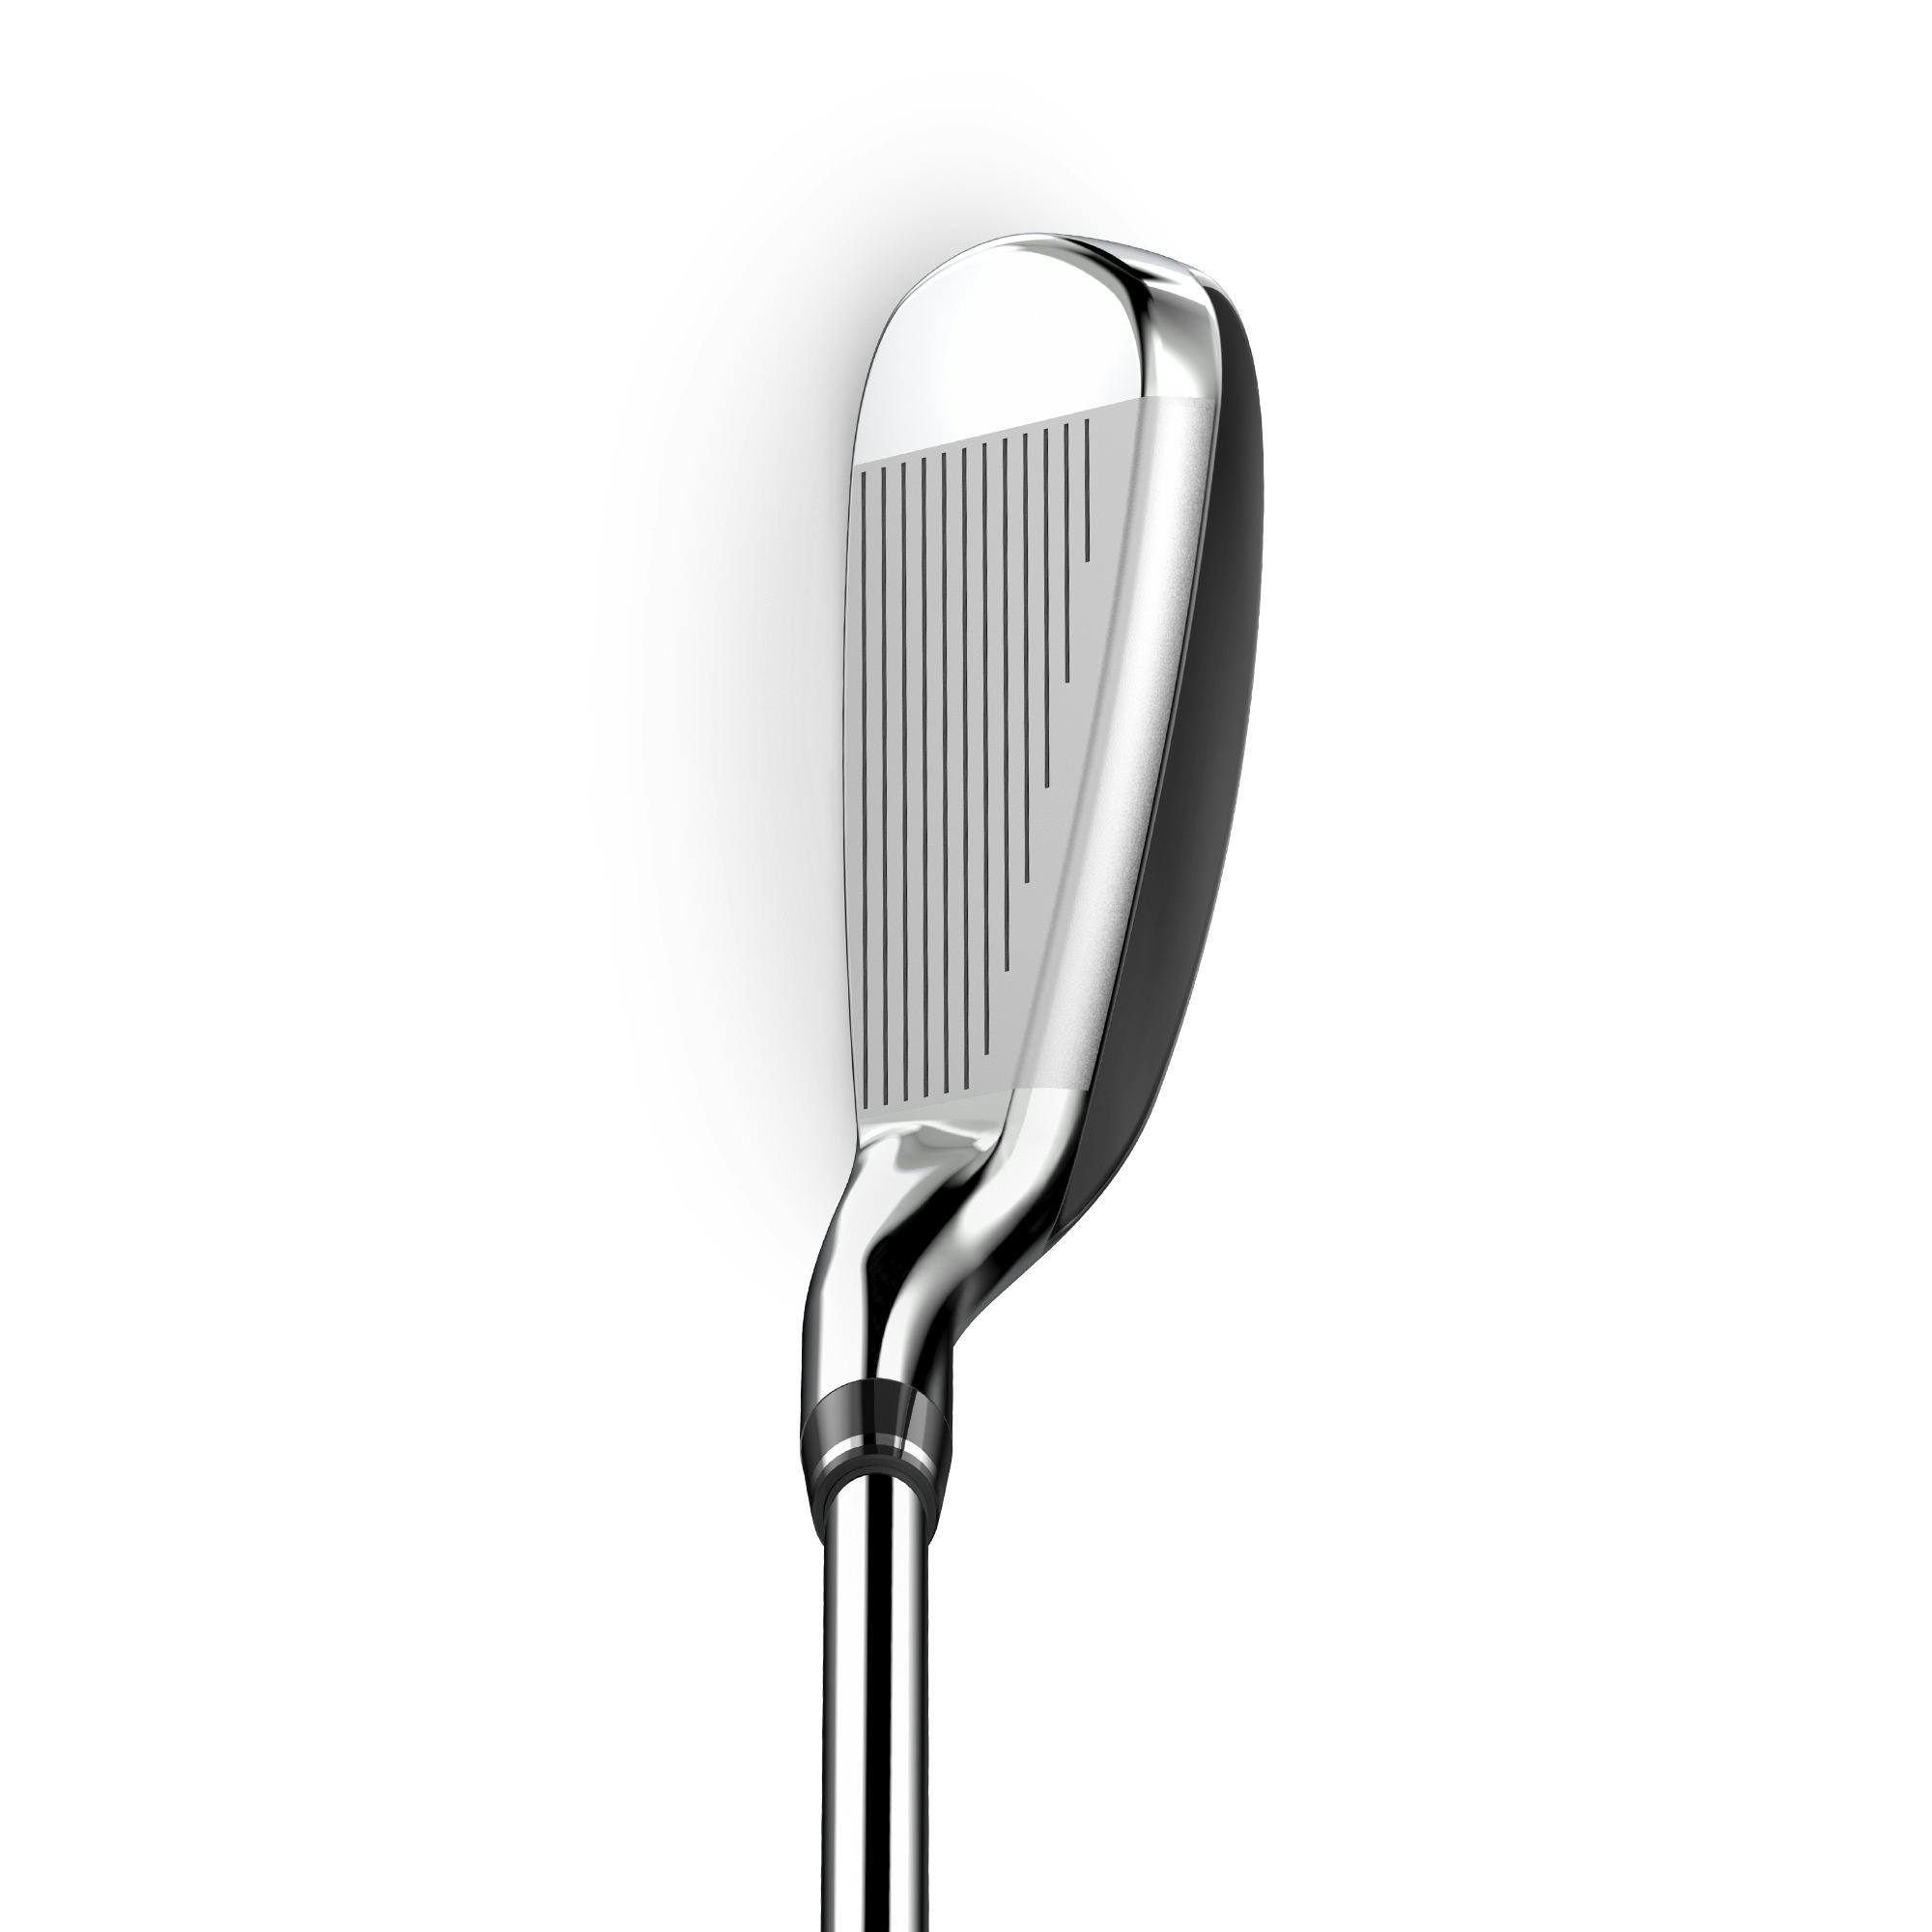 Wilson Launch Pad 2 Irons · Right handed · Graphite · Senior · 5-PW,GW